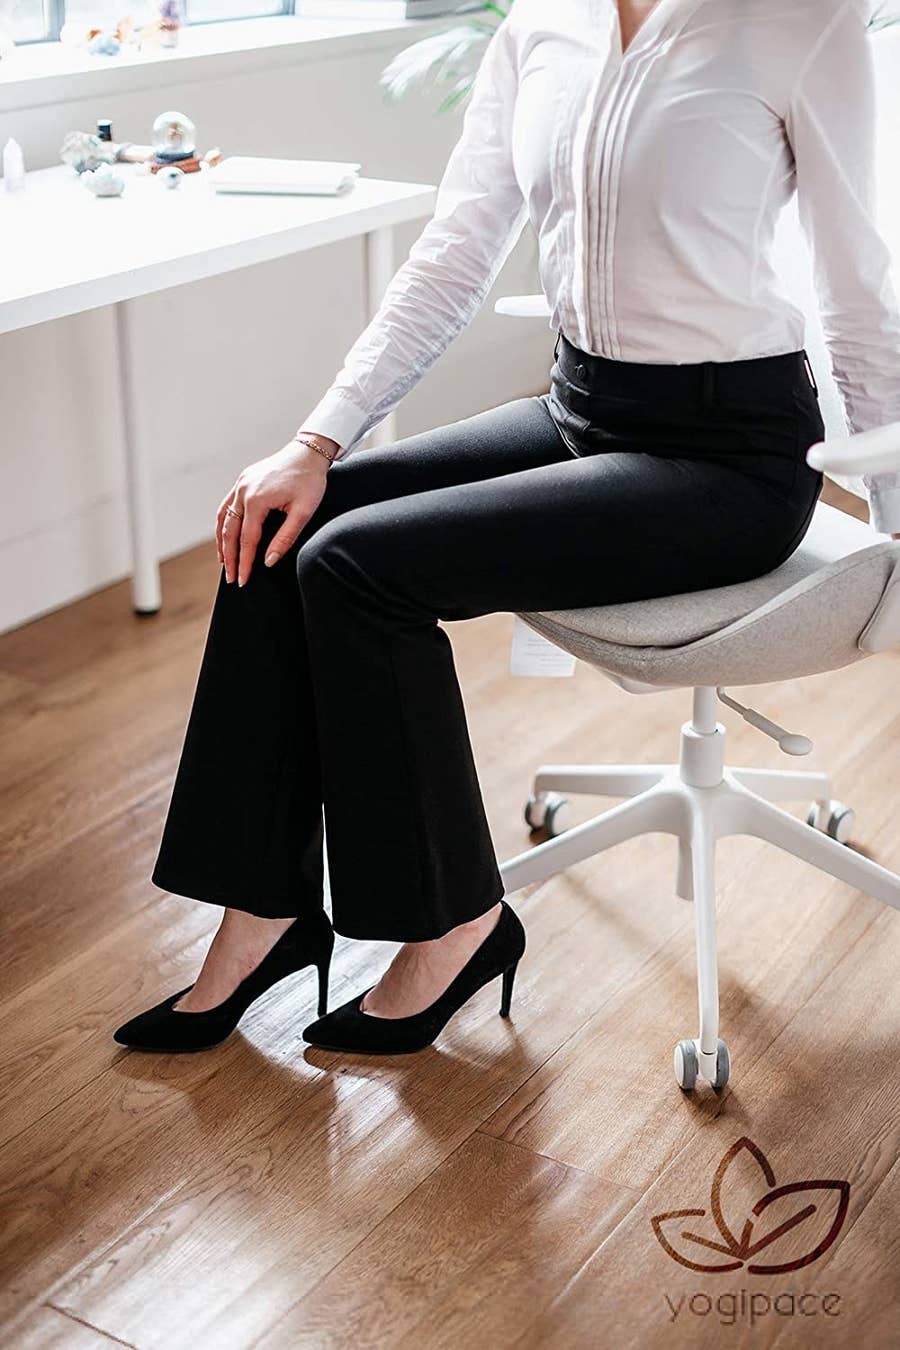 Here's How To Wear Betabrand's Crazy Popular Dress Pant Yoga Pants